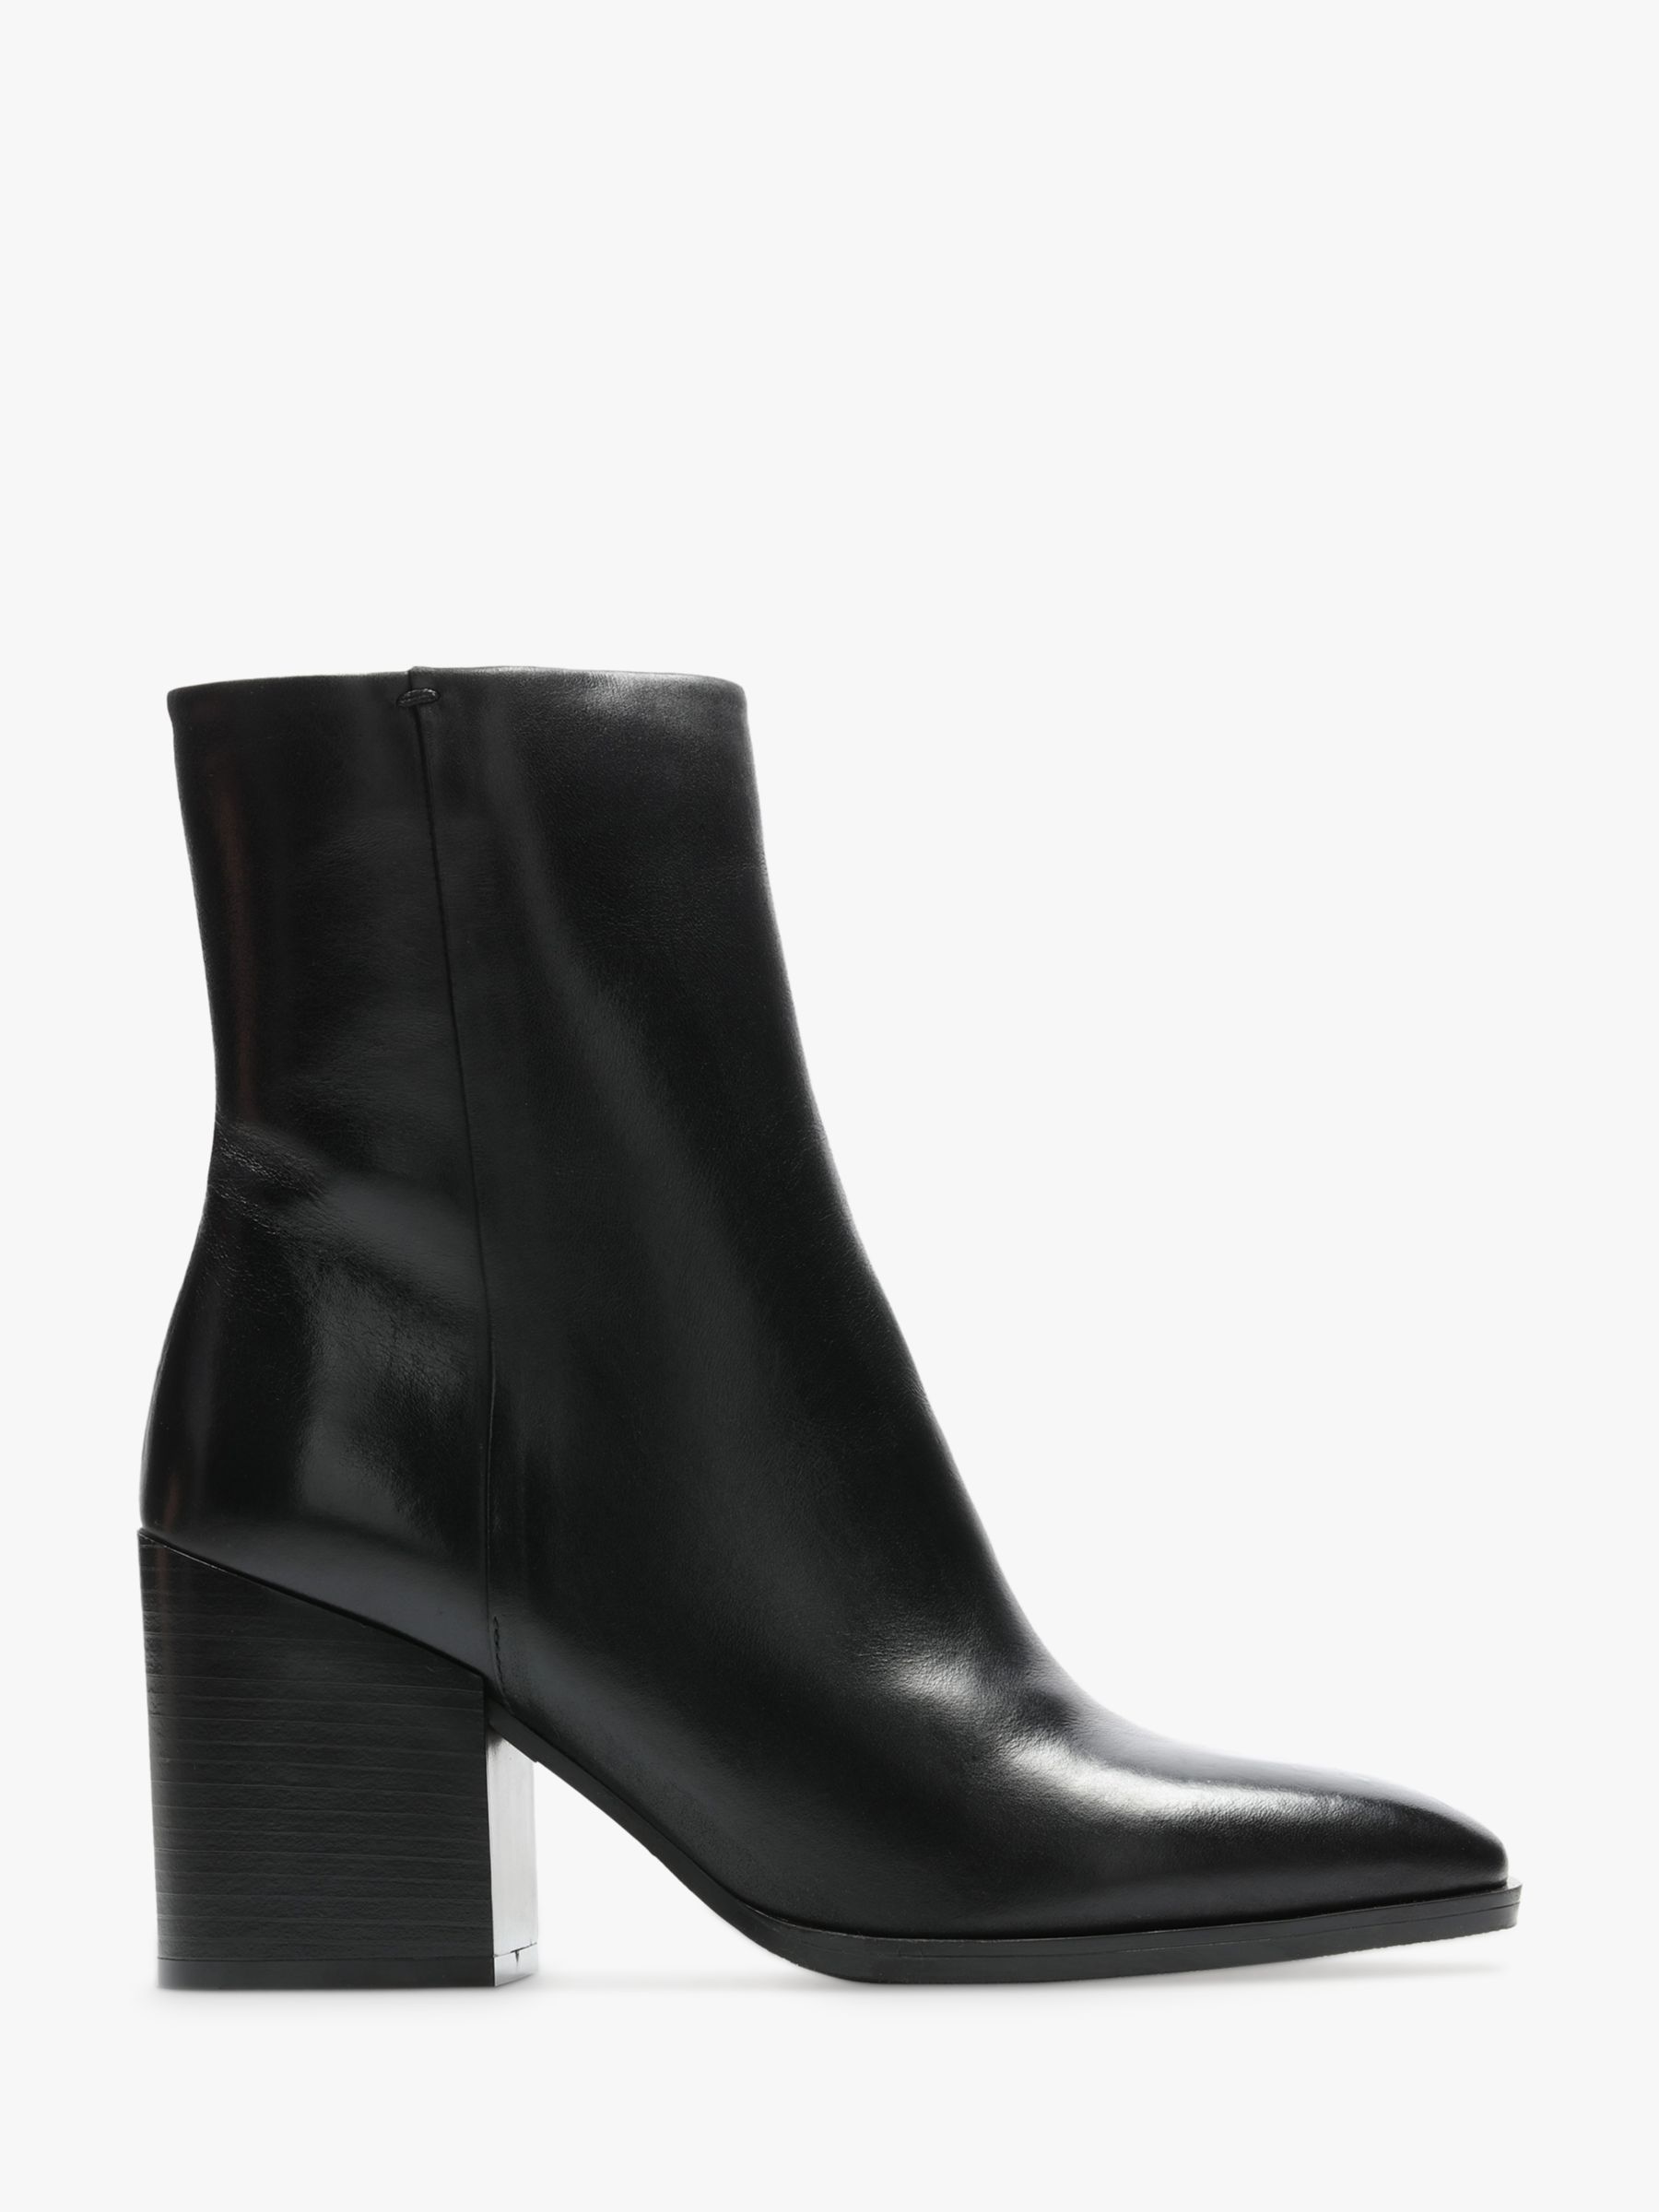 Clarks Lydia Mid Leather Stacked Heel Ankle Boots